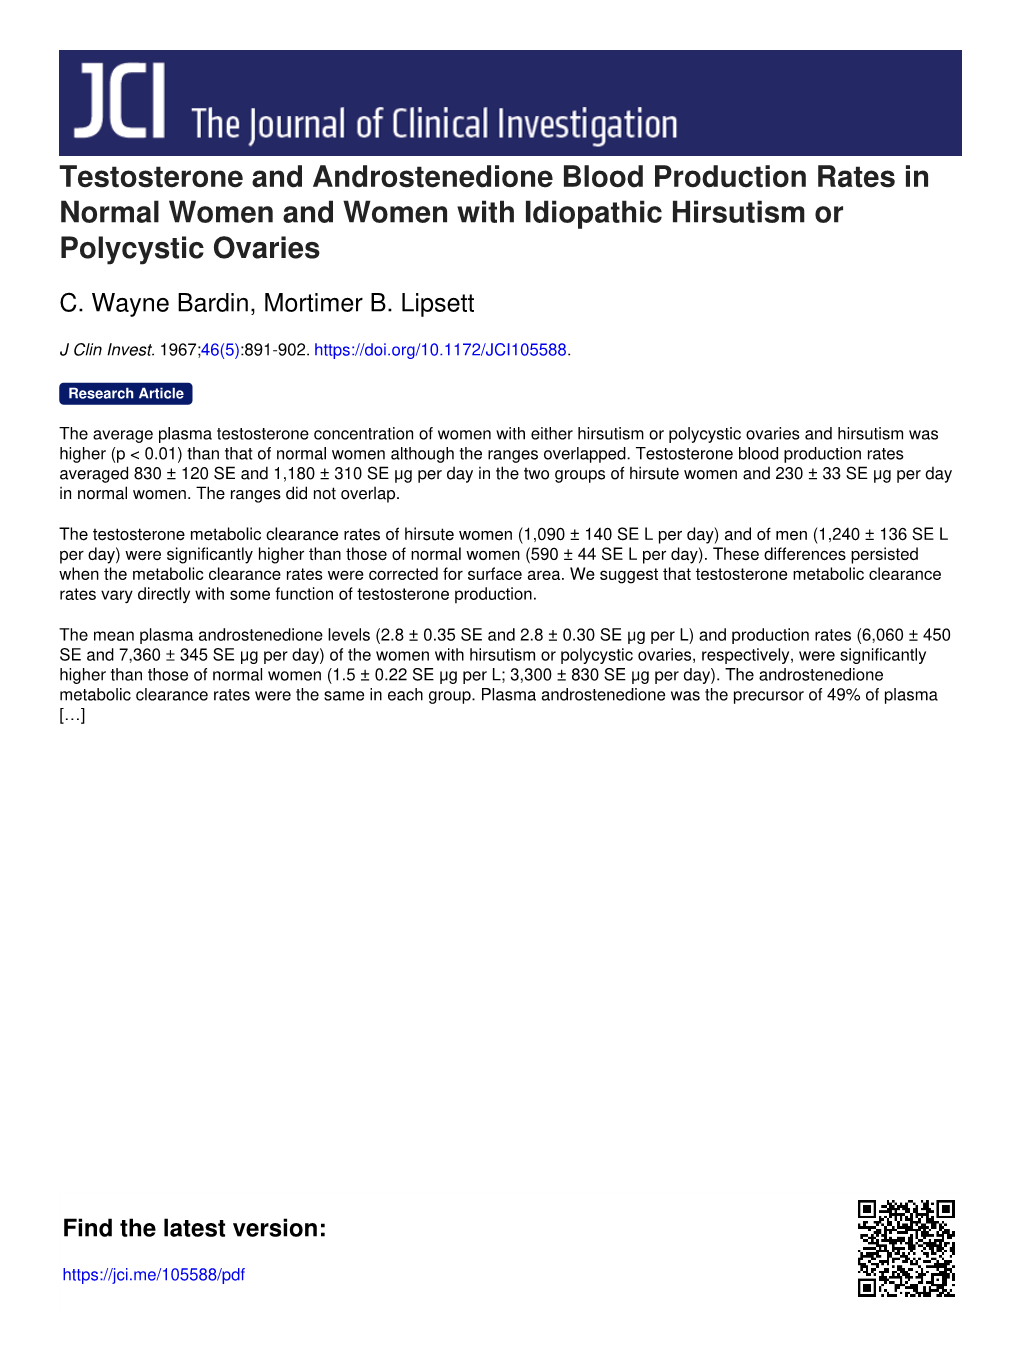 Testosterone and Androstenedione Blood Production Rates in Normal Women and Women with Idiopathic Hirsutism Or Polycystic Ovaries